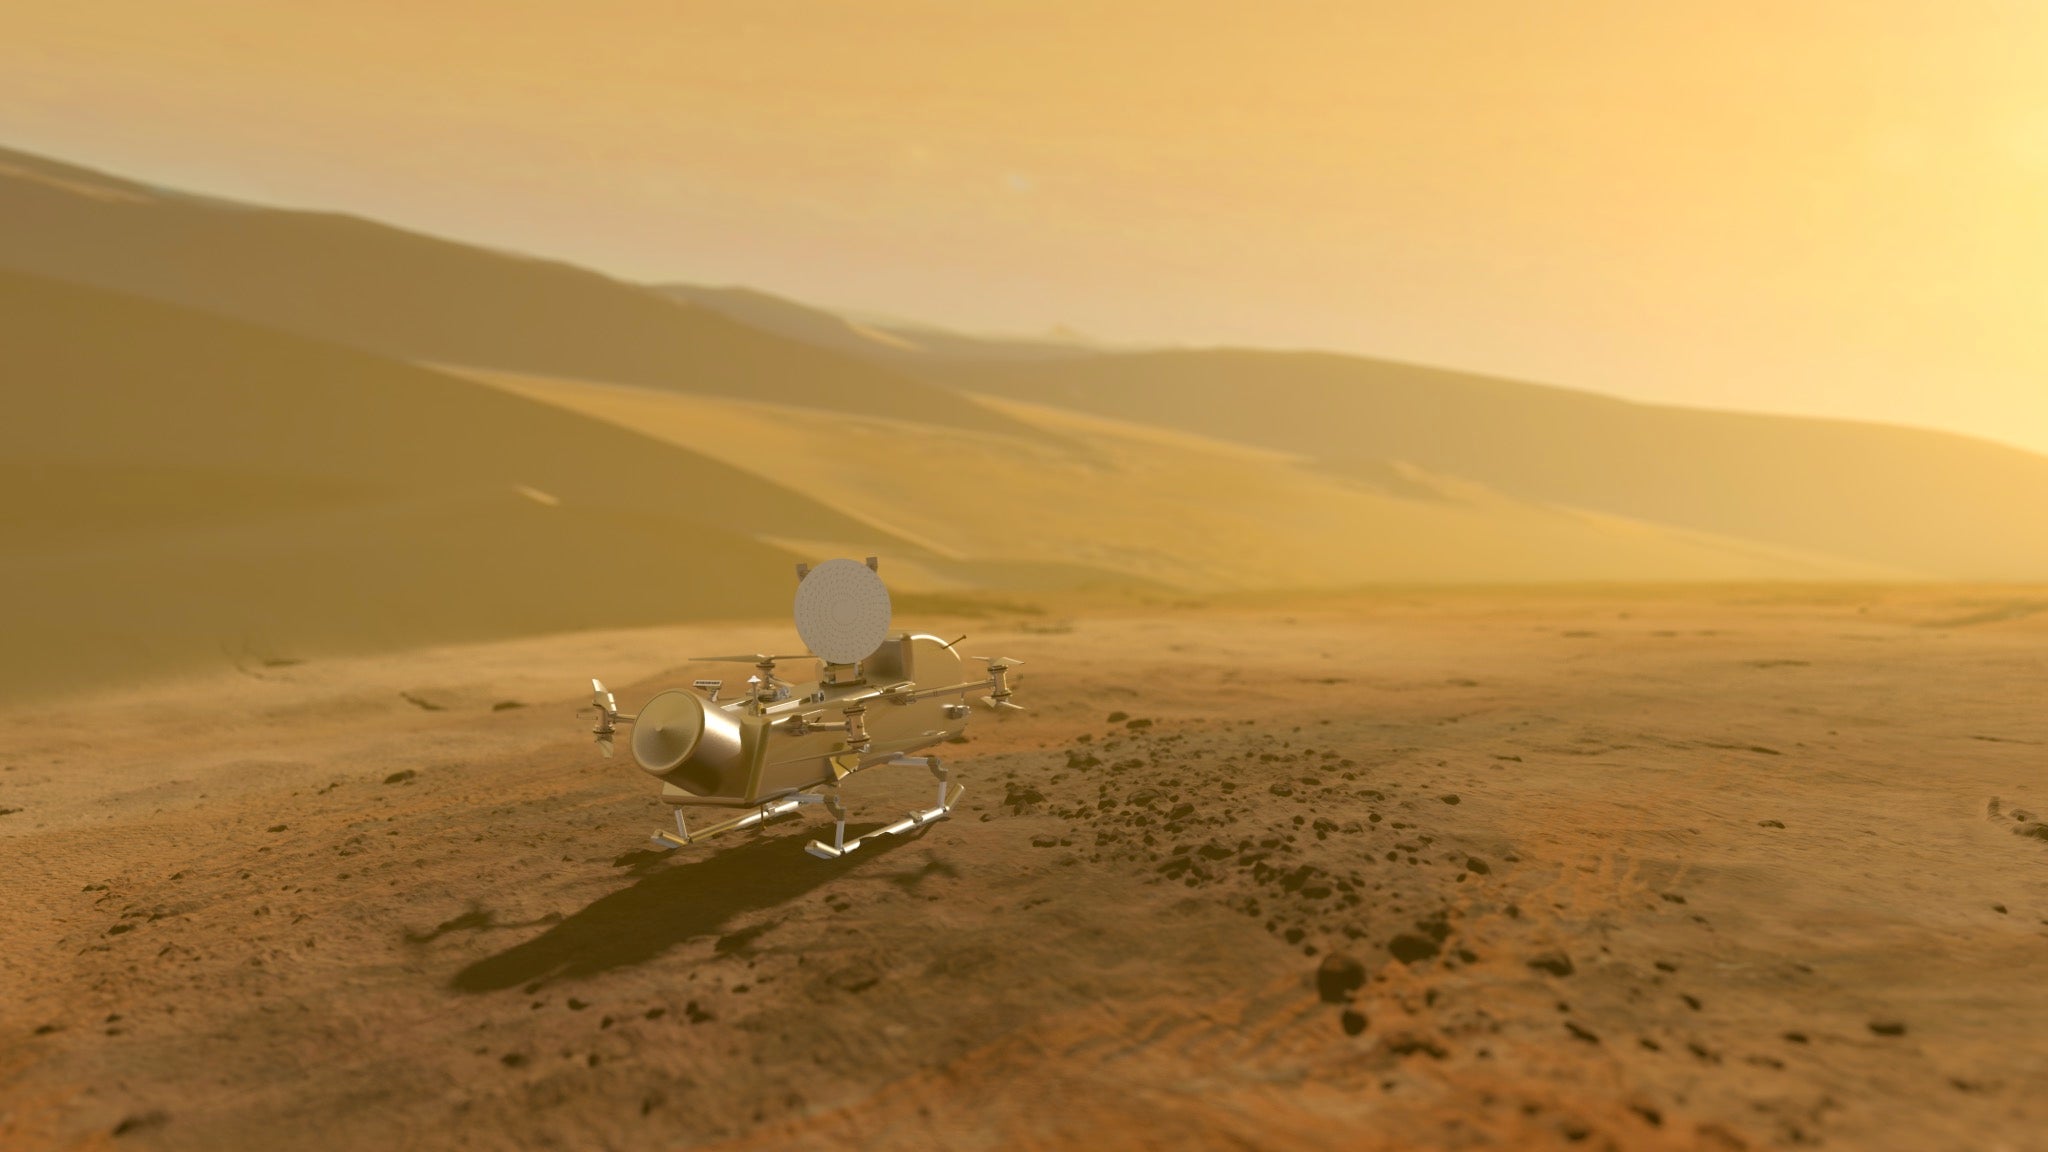 Dragonfly departs and heads off toward its next landing spot on Titan in this artist's impression.
Image credit: NASA/Johns Hopkins APL/Steve Gribben
